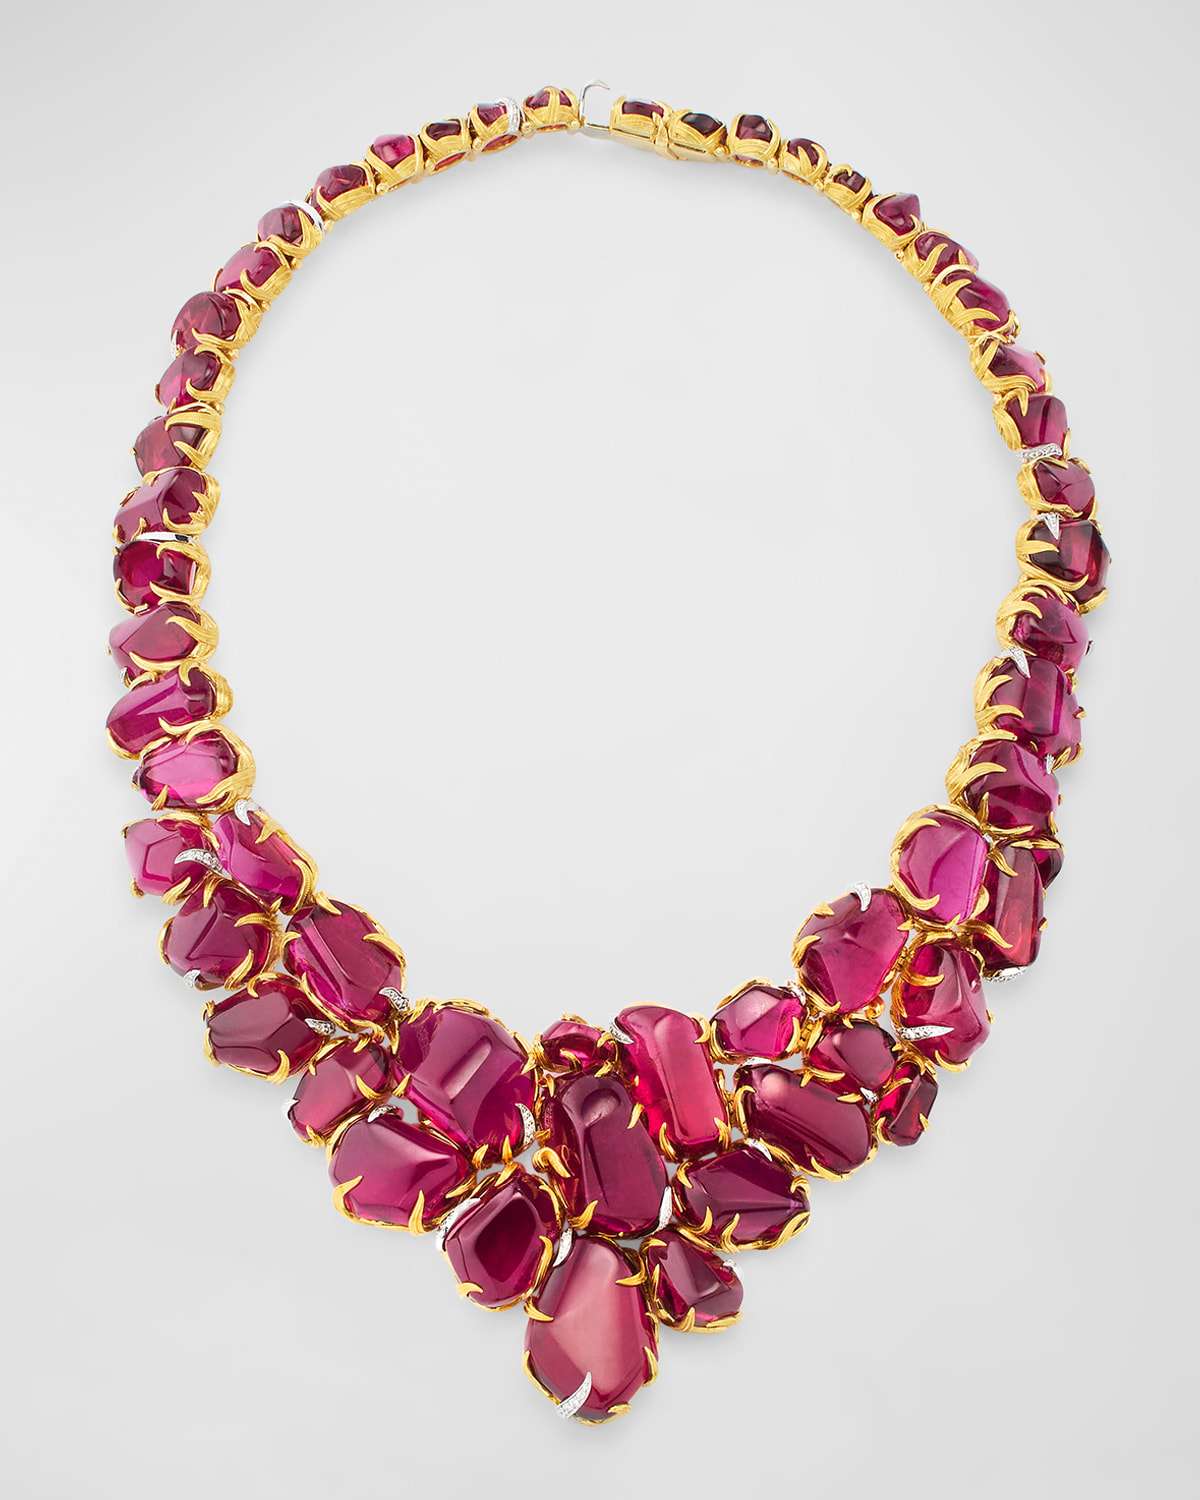 Estate Lee Buckingham 22K Yellow Gold and Platinum Necklace with Rubellite and Diamonds